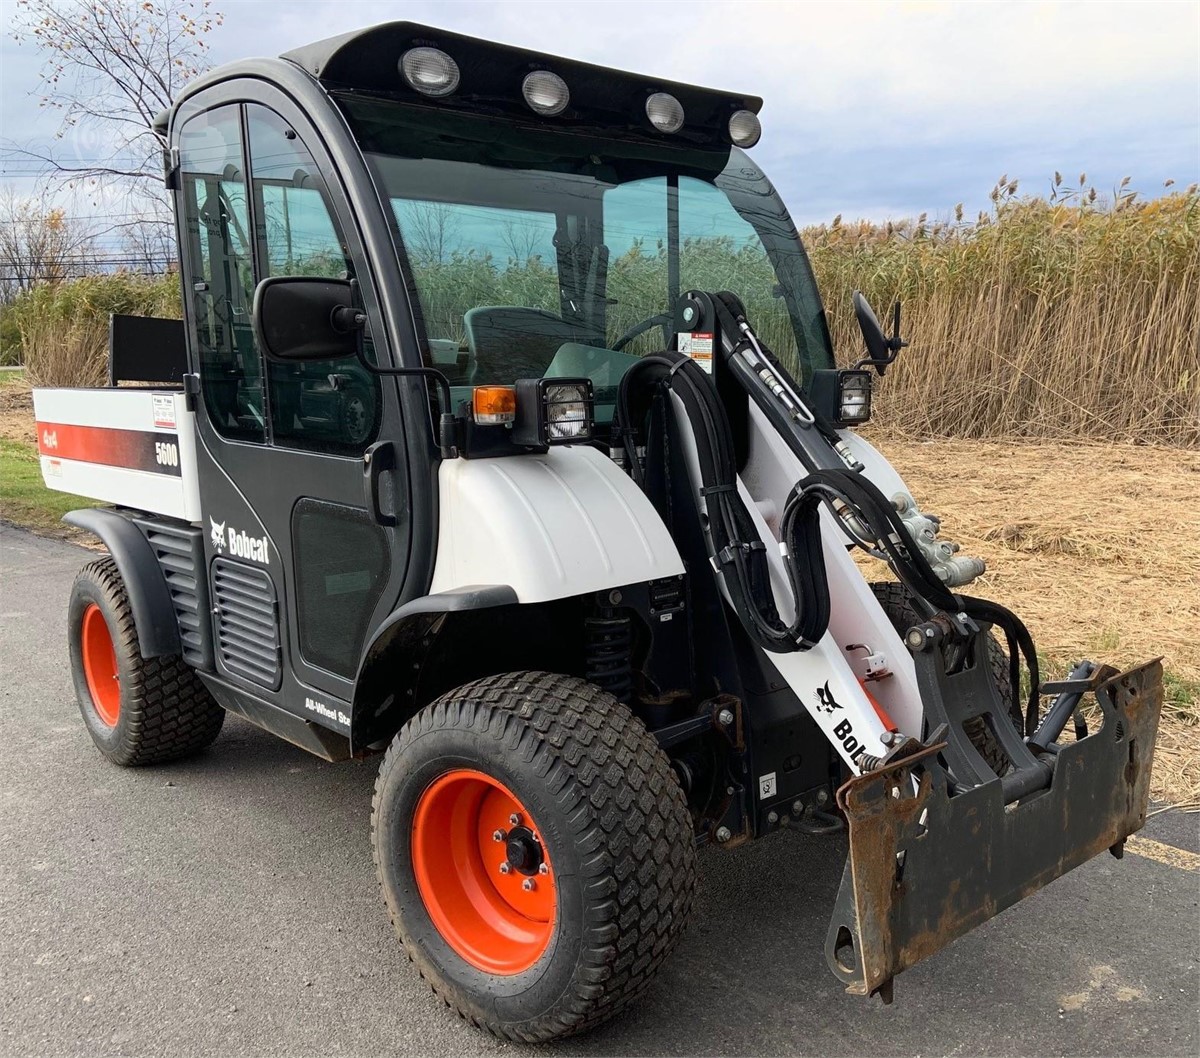 2018 BOBCAT TOOLCAT 5600 For Sale In East Syracuse, New York www